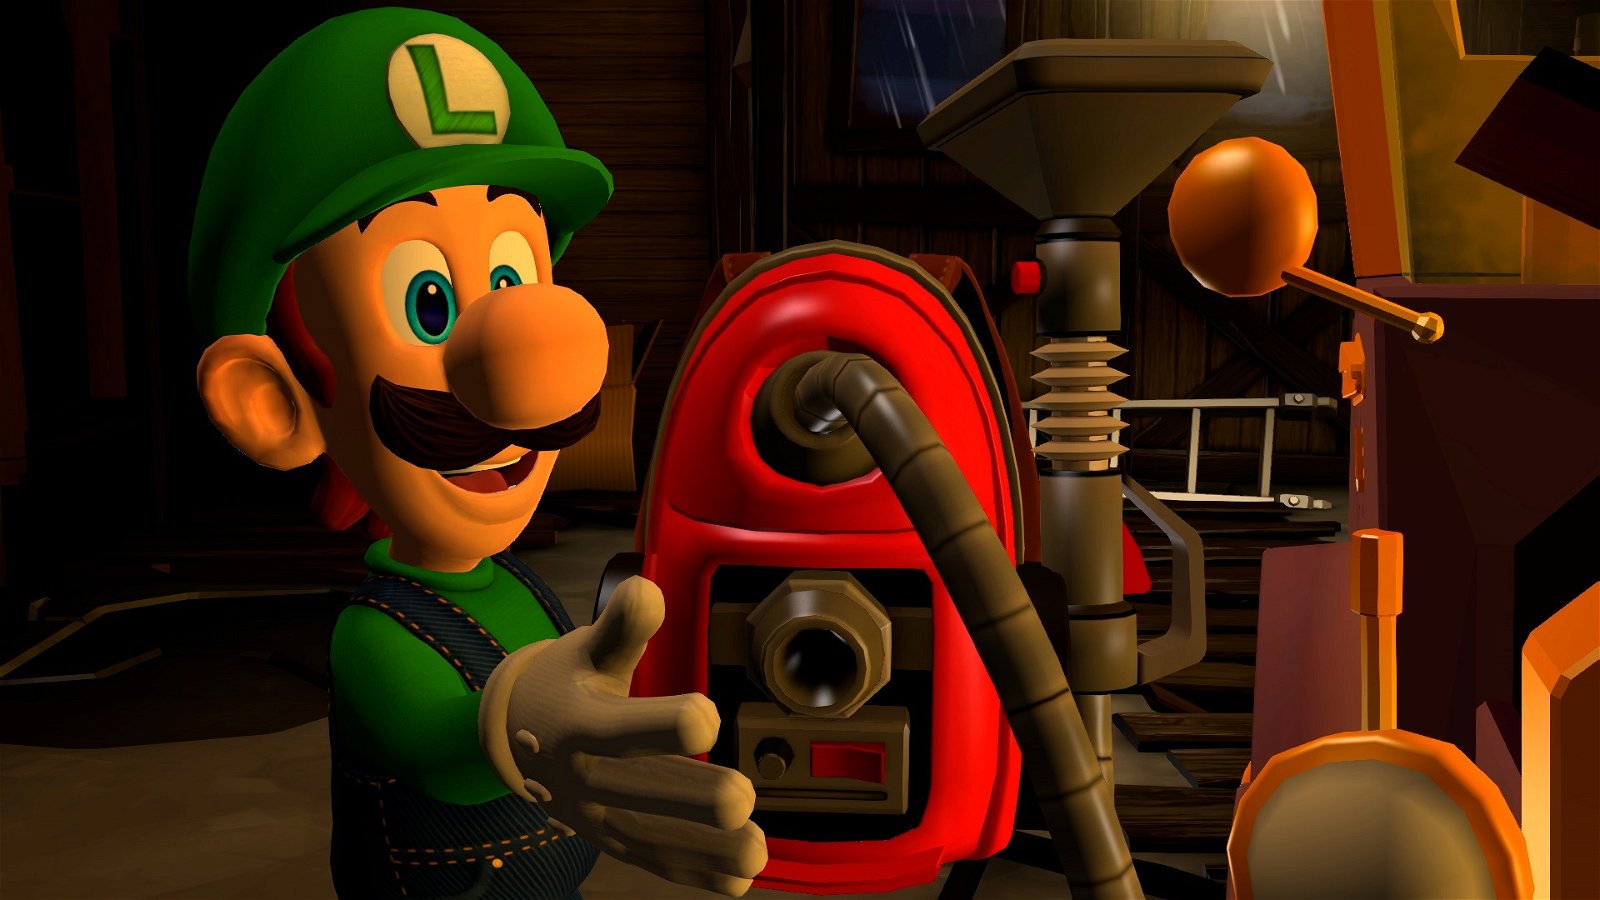 Luigi'S Mansion 2 Hd Rated By Esrb, Nintendo Horror For Everyone